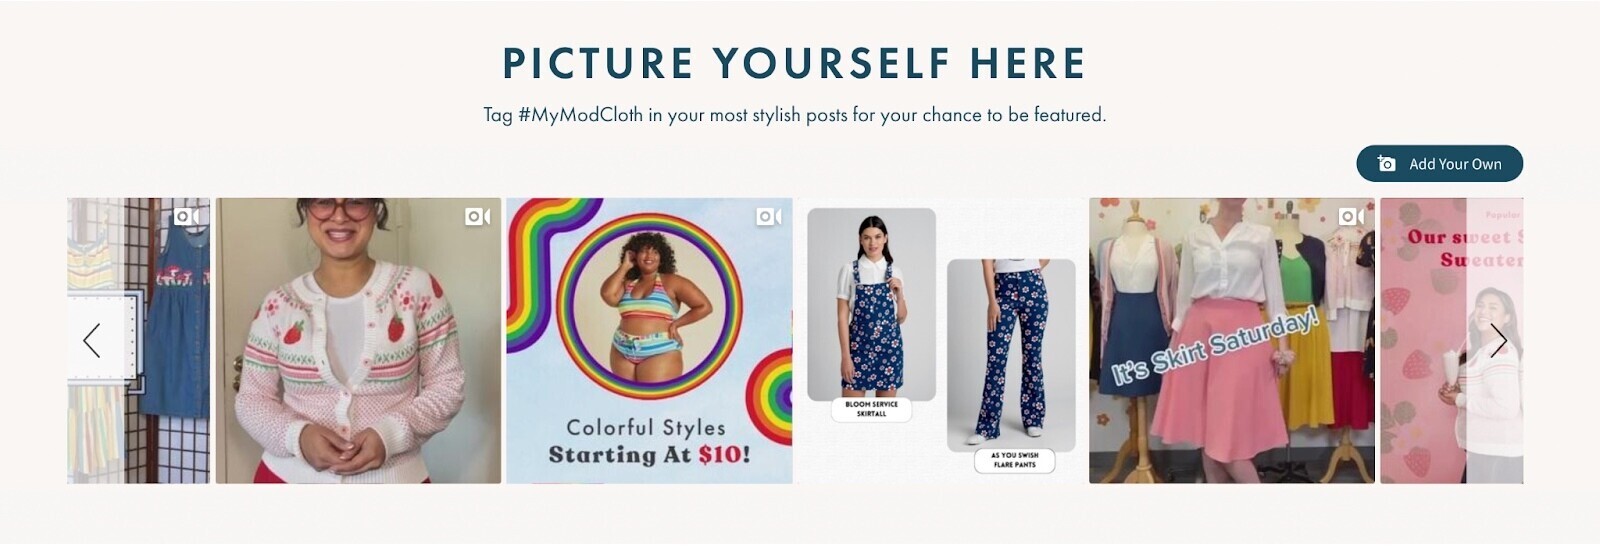 "PICTURE YOURSELF HERE" section of Modcloth' homepage